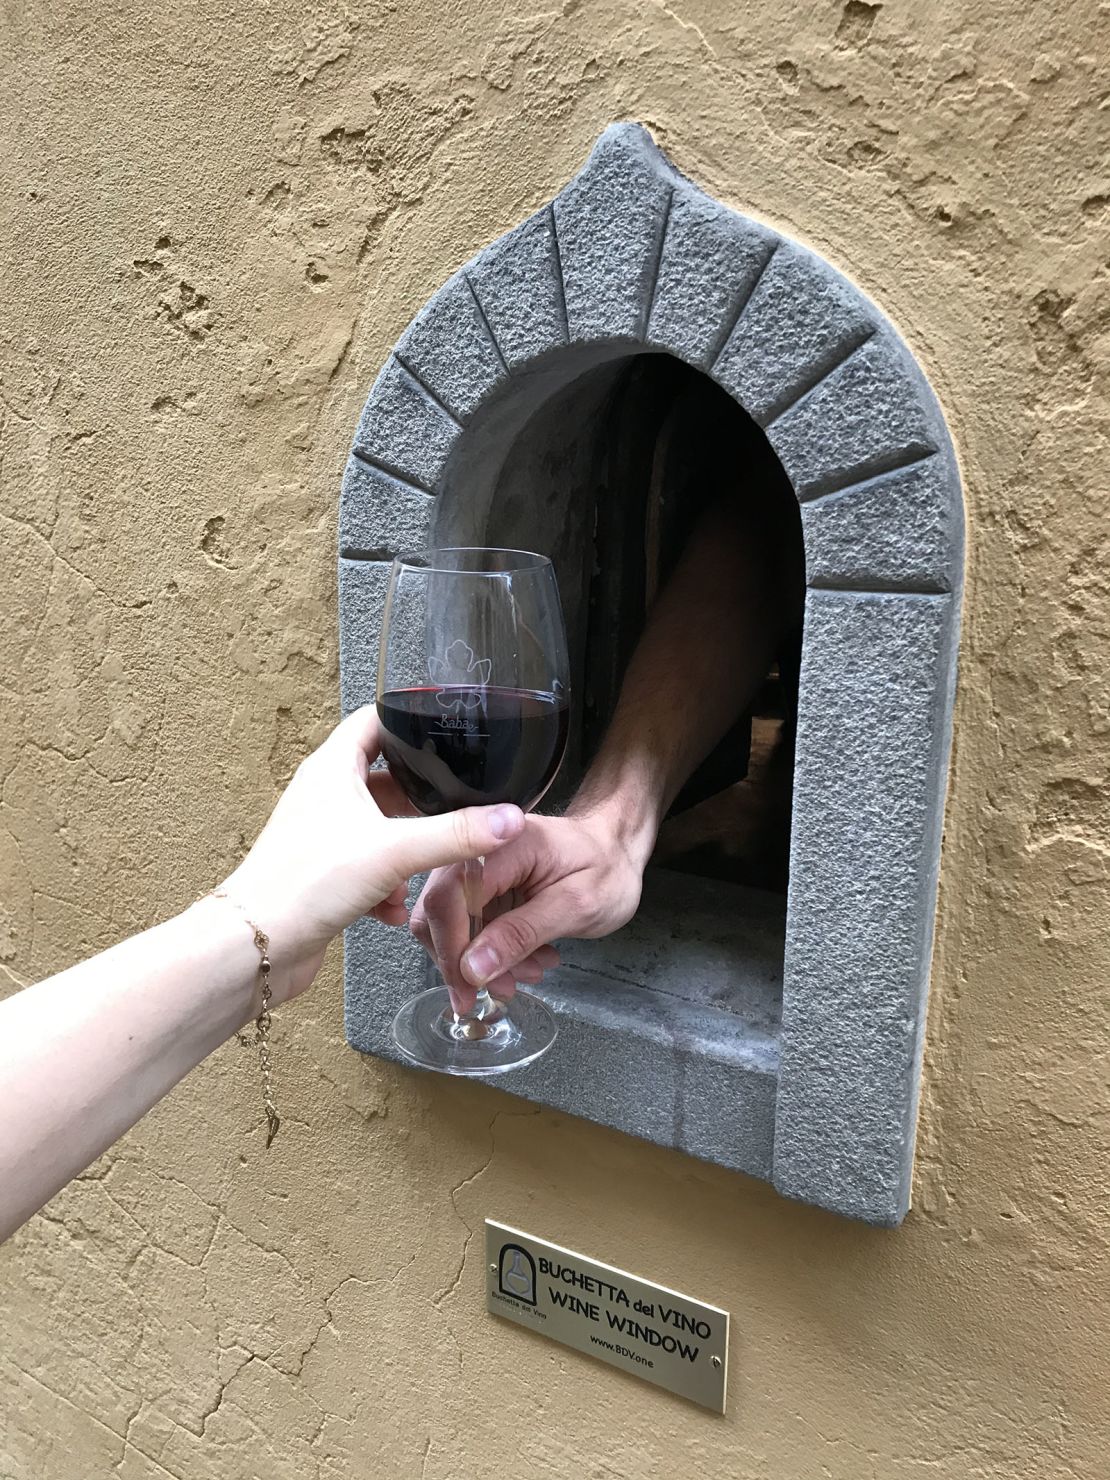 A glass of red being served through a wine window in Florence.  